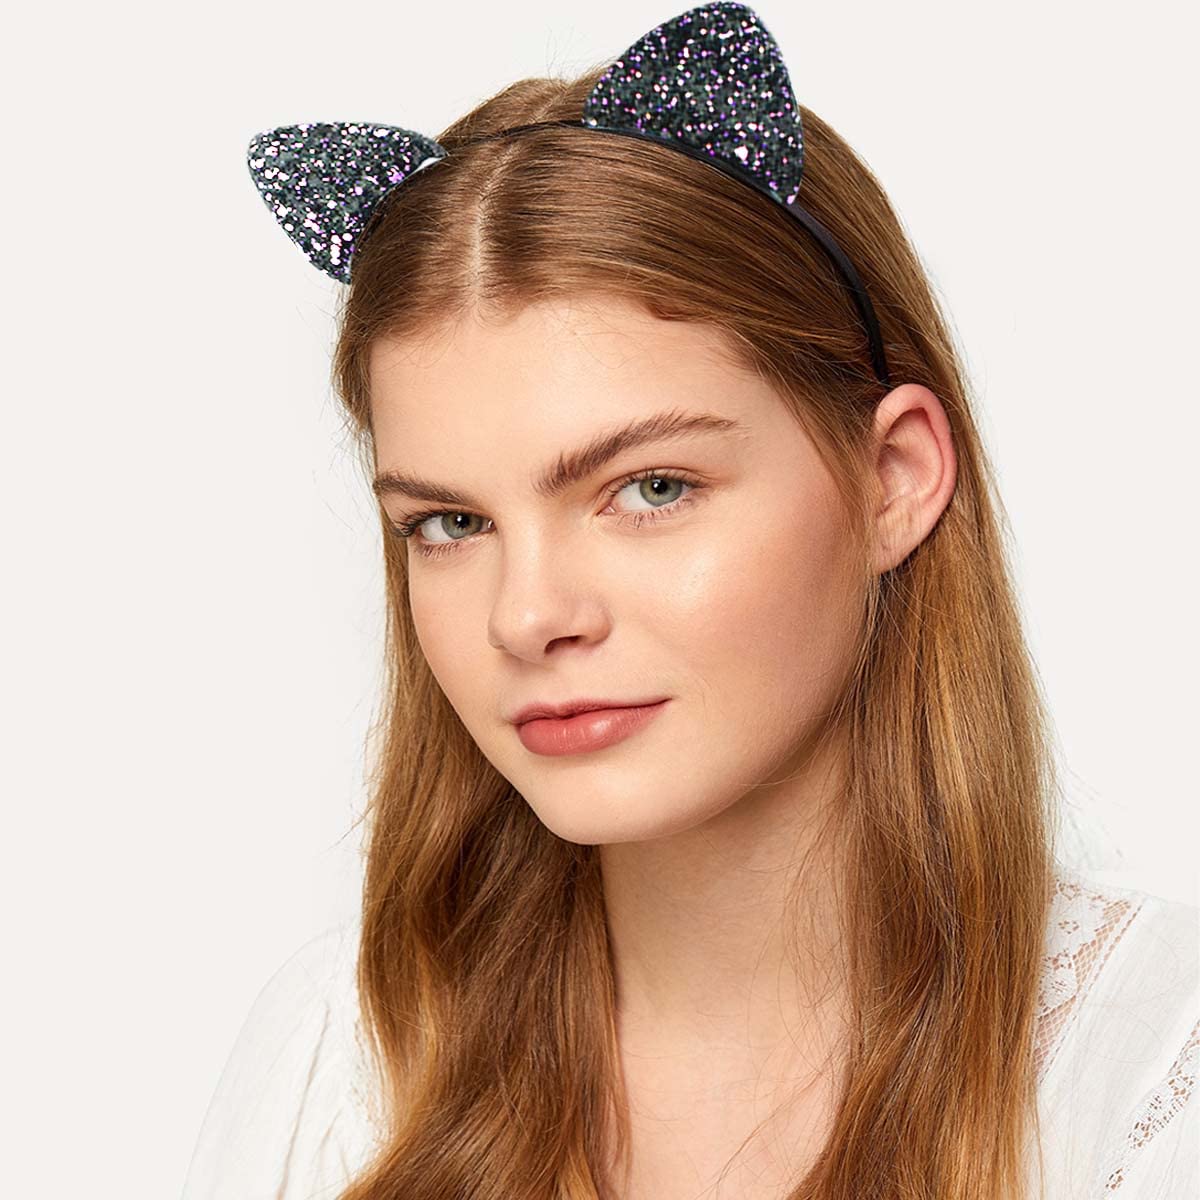 12 Pack Sequin Cat Ears Headband for Girls and Women Glitter Headbands with Cute Ear Hair Accessories for Daily Wearing and Party Decoration Shiny Kitty Hairbands Cat Ear Hair Hoops (Multicolor)